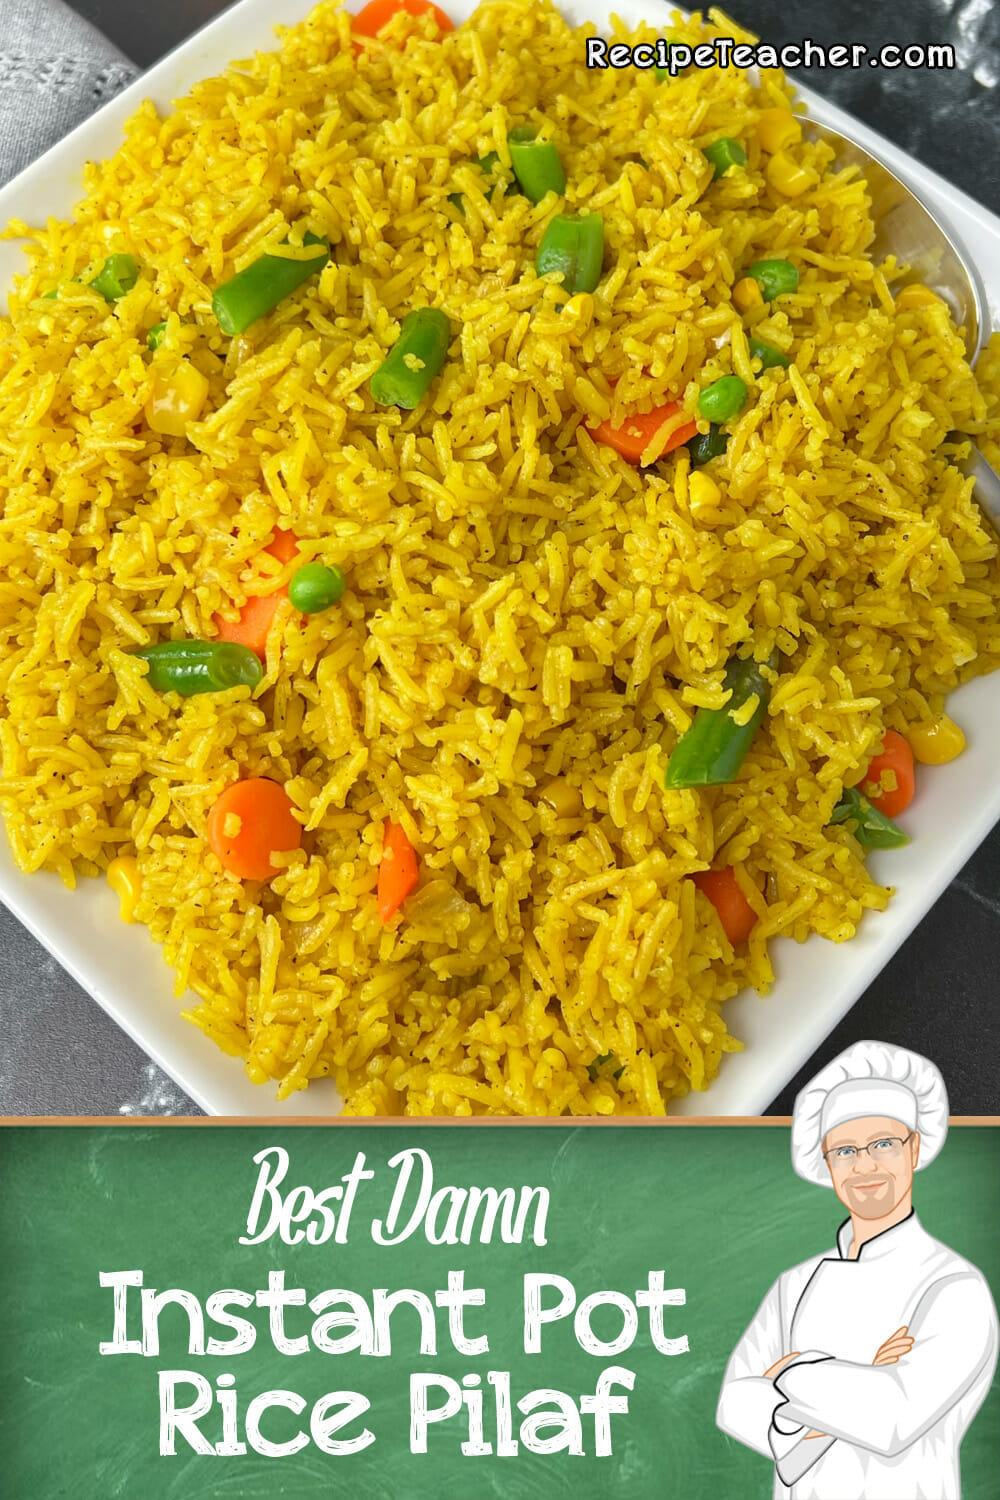 Recipe for Instant Pot Rice Pilaf